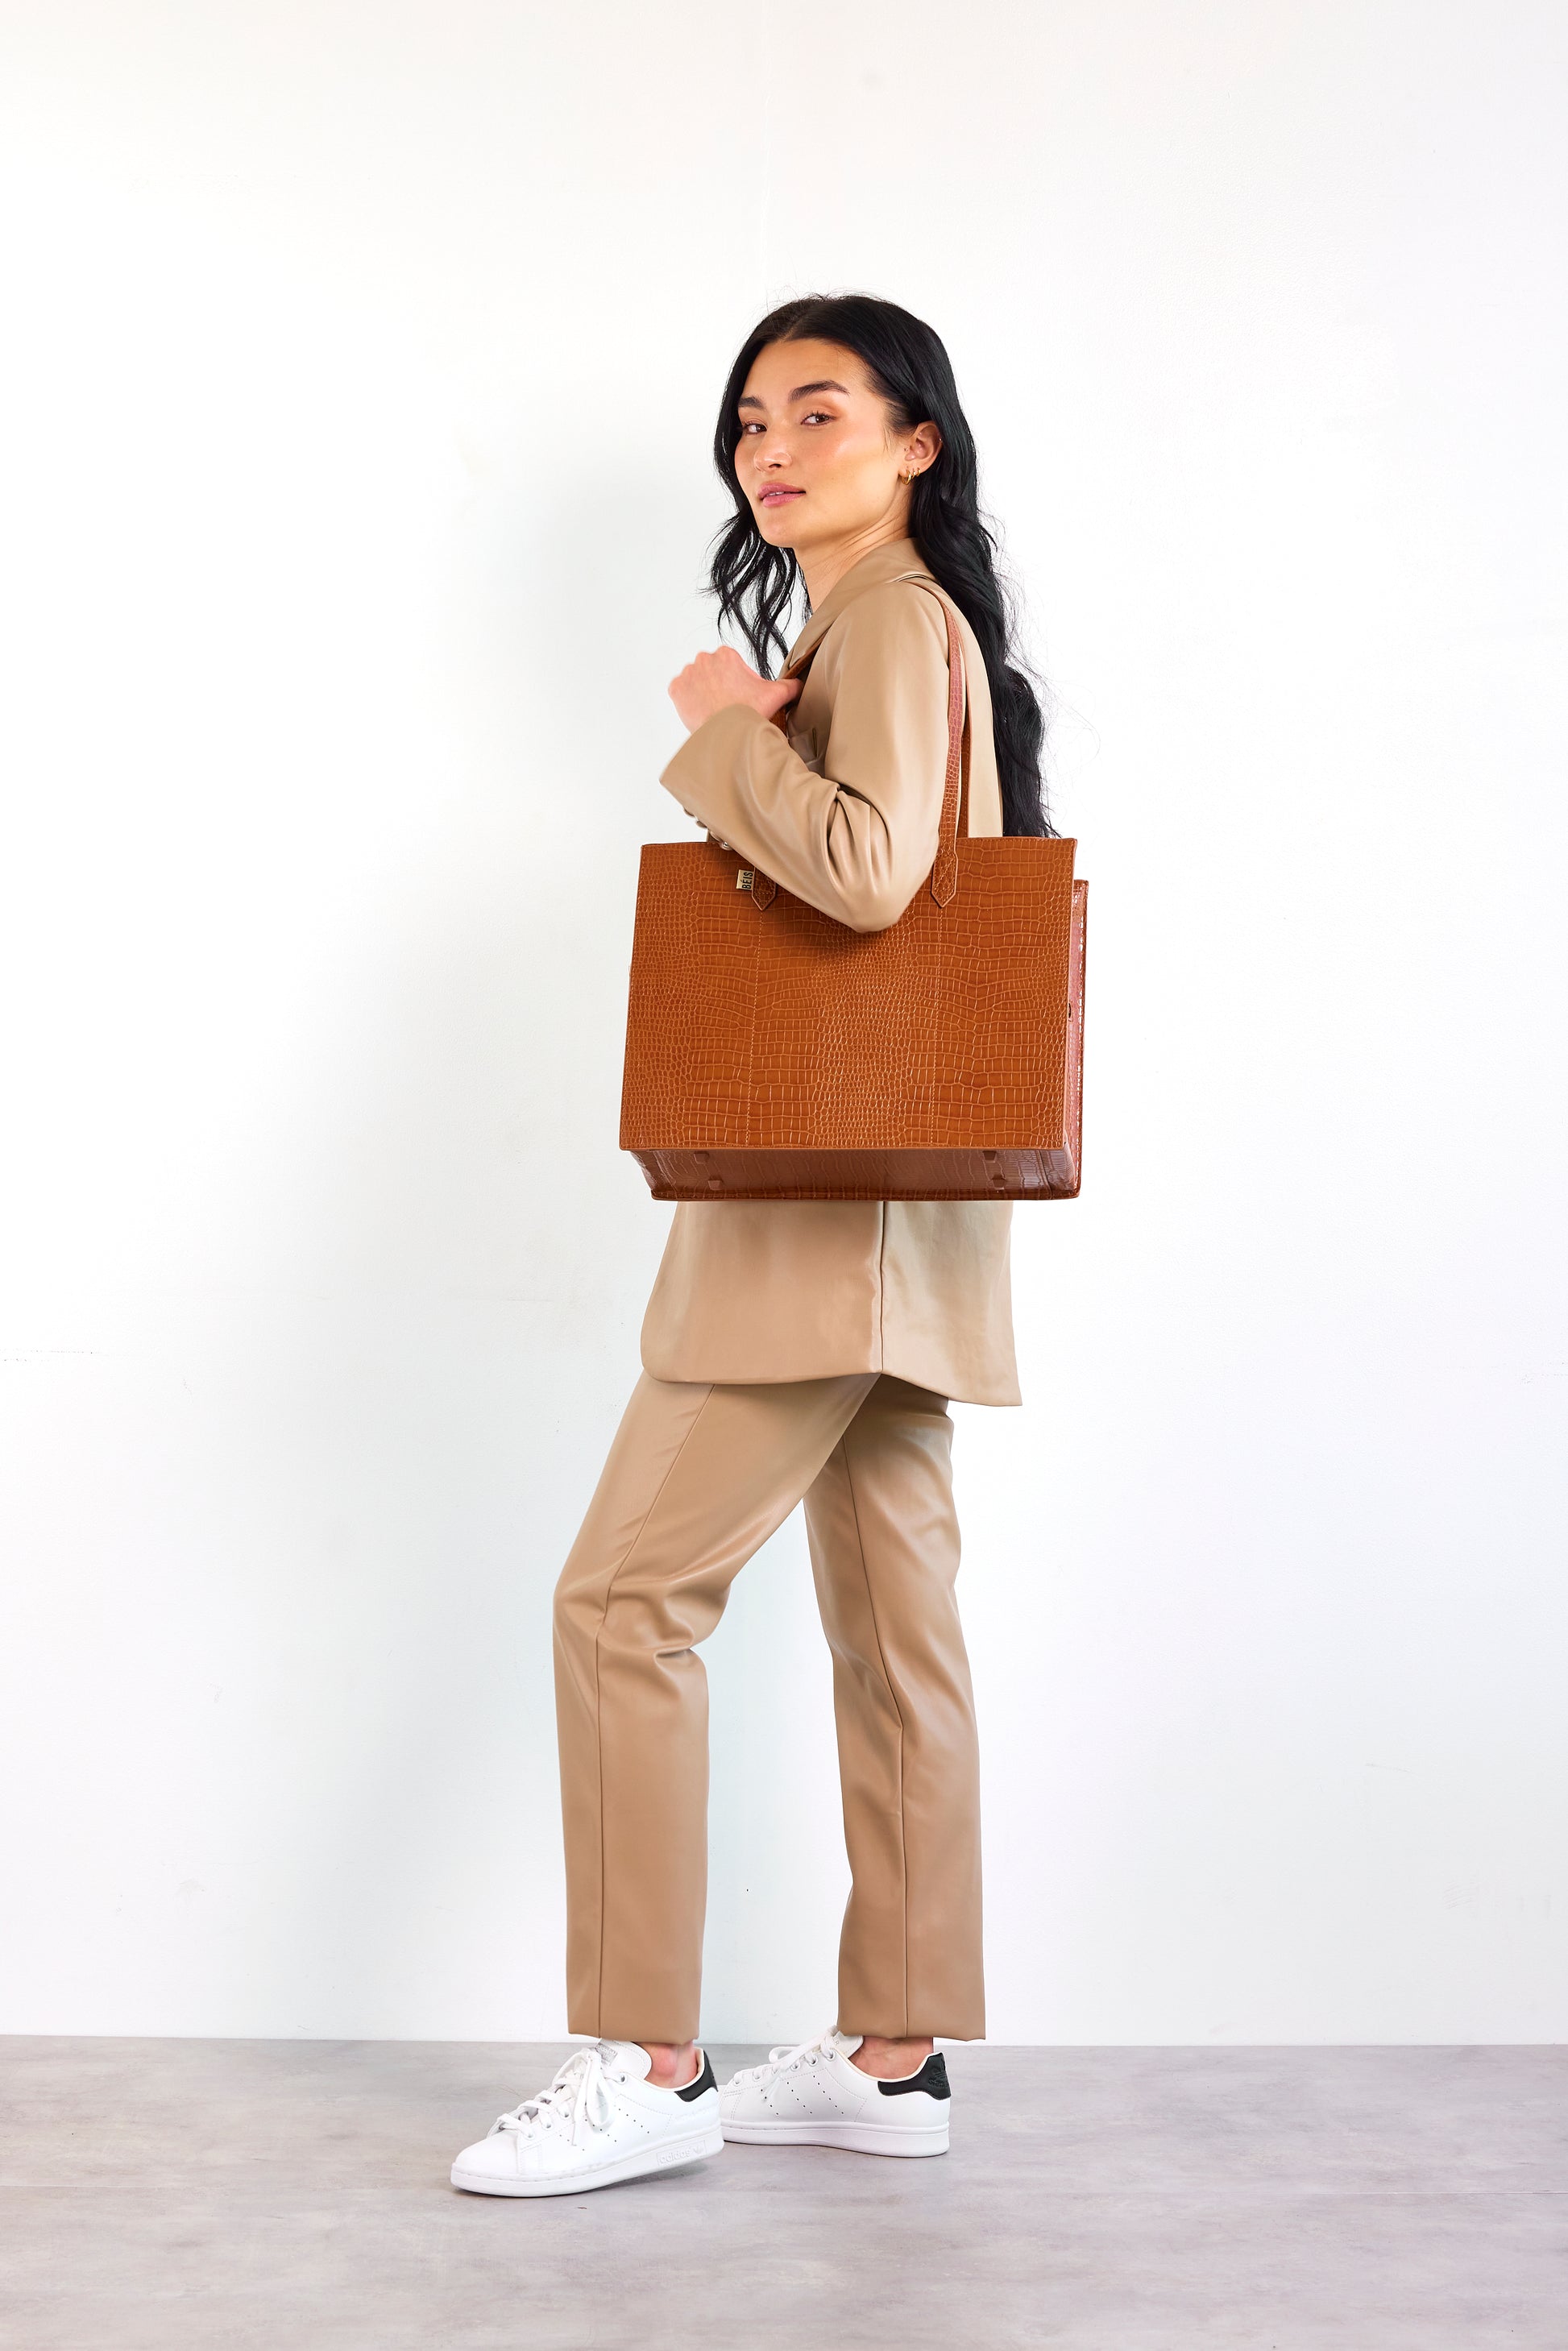 Franklin Covey Tan Leather Tote Work Bag Purse